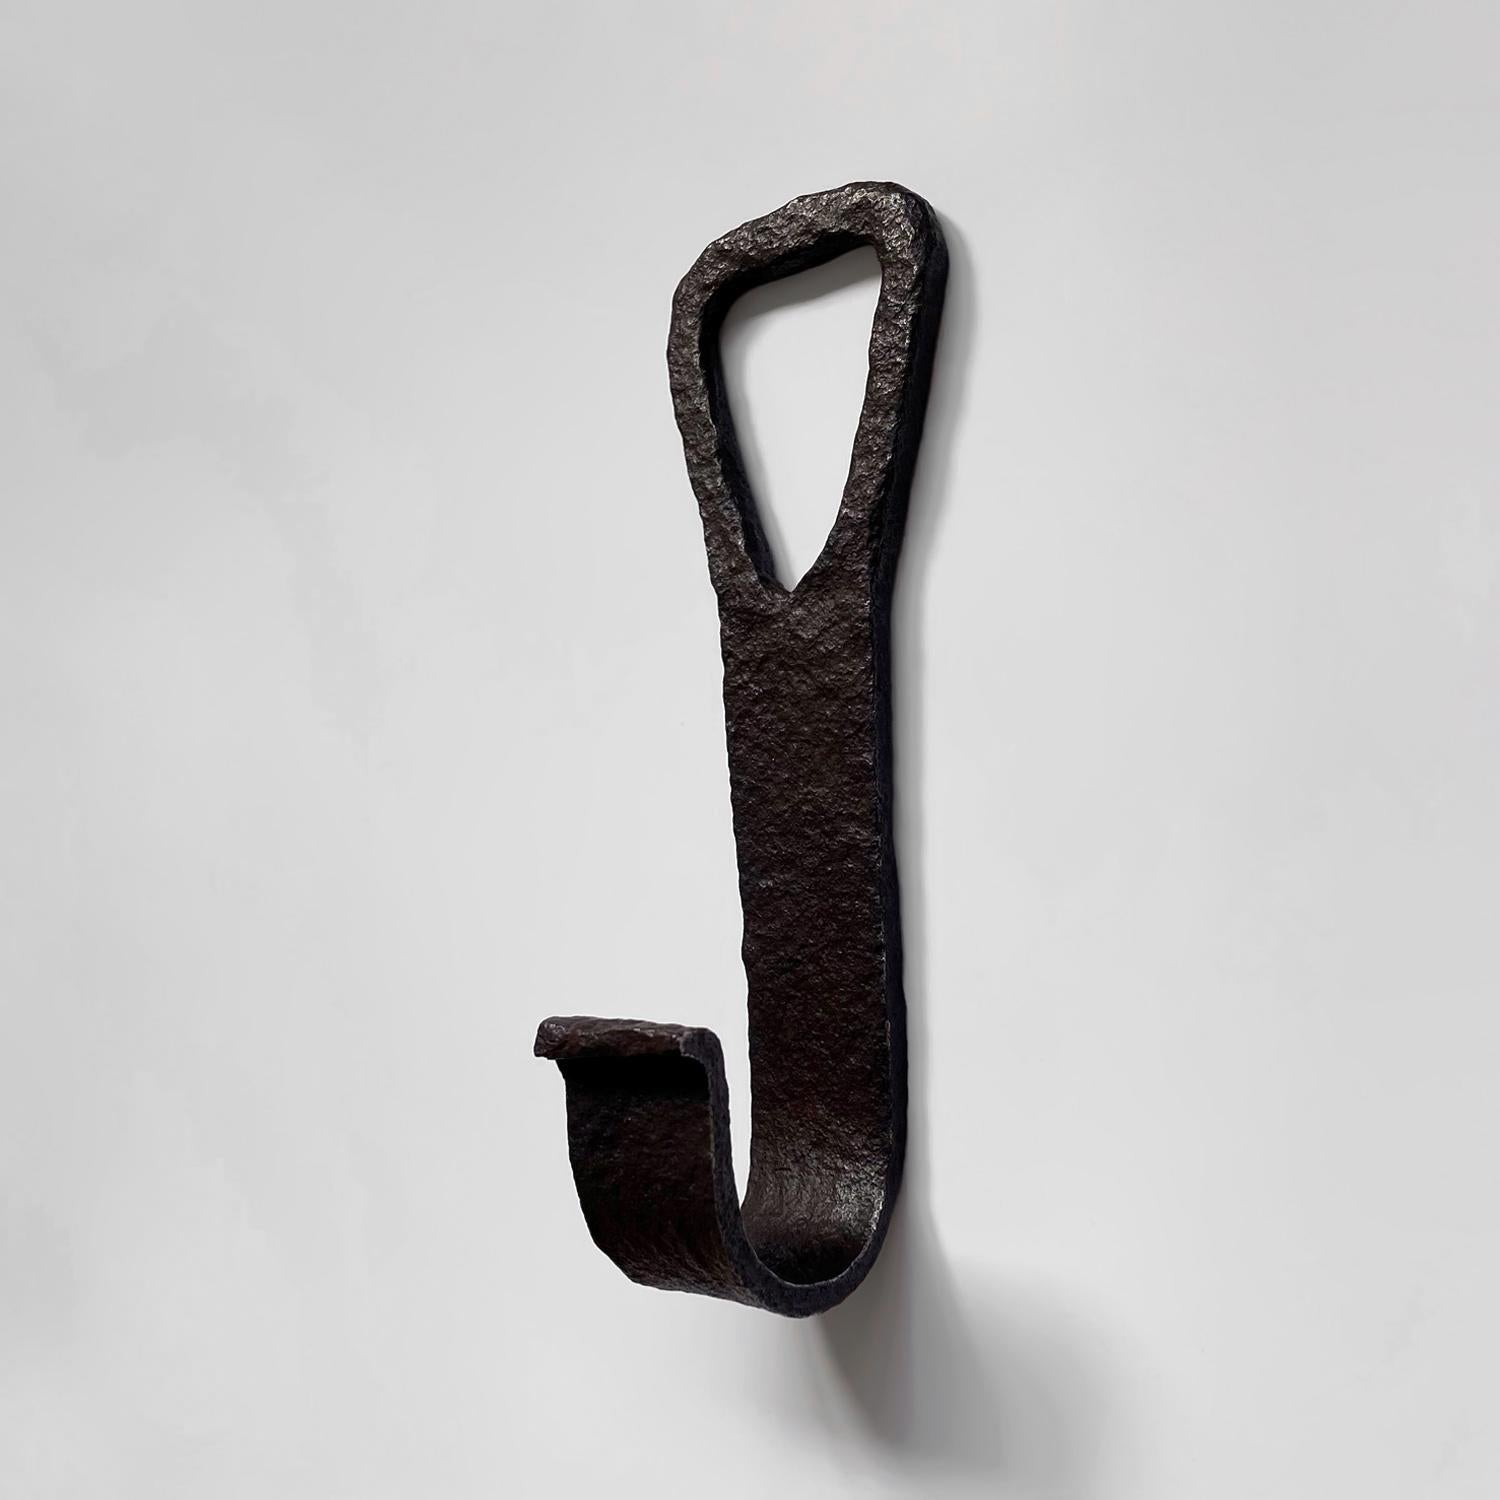 French rustic textured iron wall hook
France, mid century
Beautifully textured flat bar iron in a dark chocolate tone gives a wonderful rustic feel
Curved wide lip J hook with upturned lip detail
Nabla shaped cut out makes it easy for wall mounting